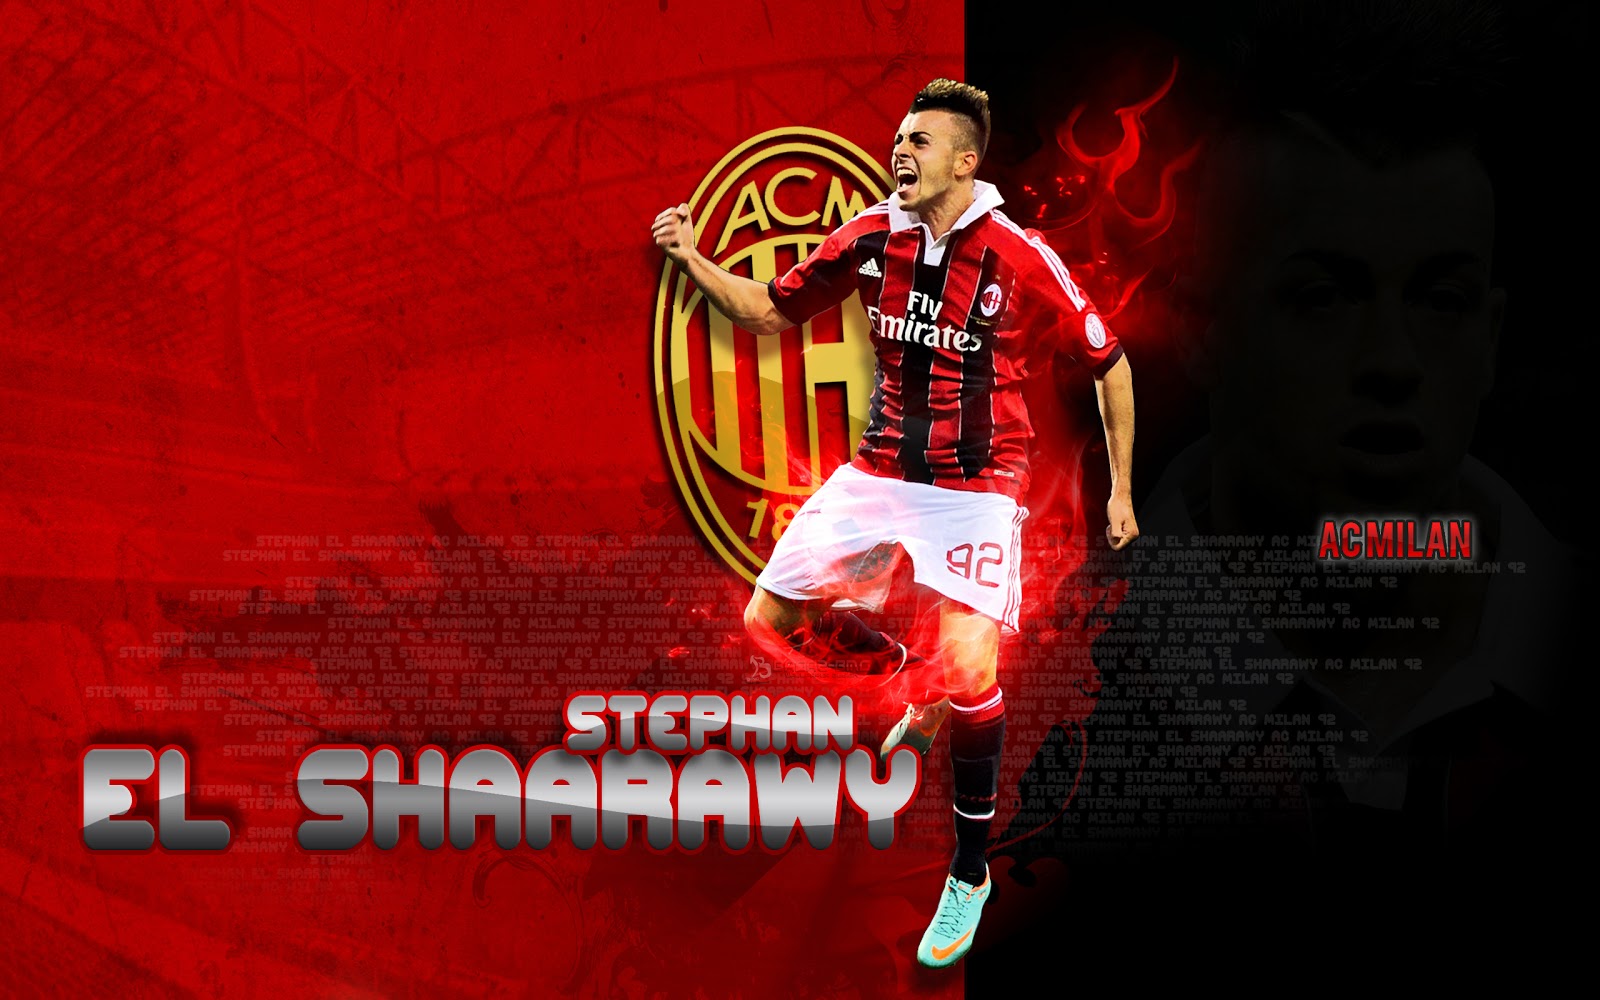 FC Ac Milan HD Wallpapers| HD Wallpapers ,Backgrounds ,Photos ...